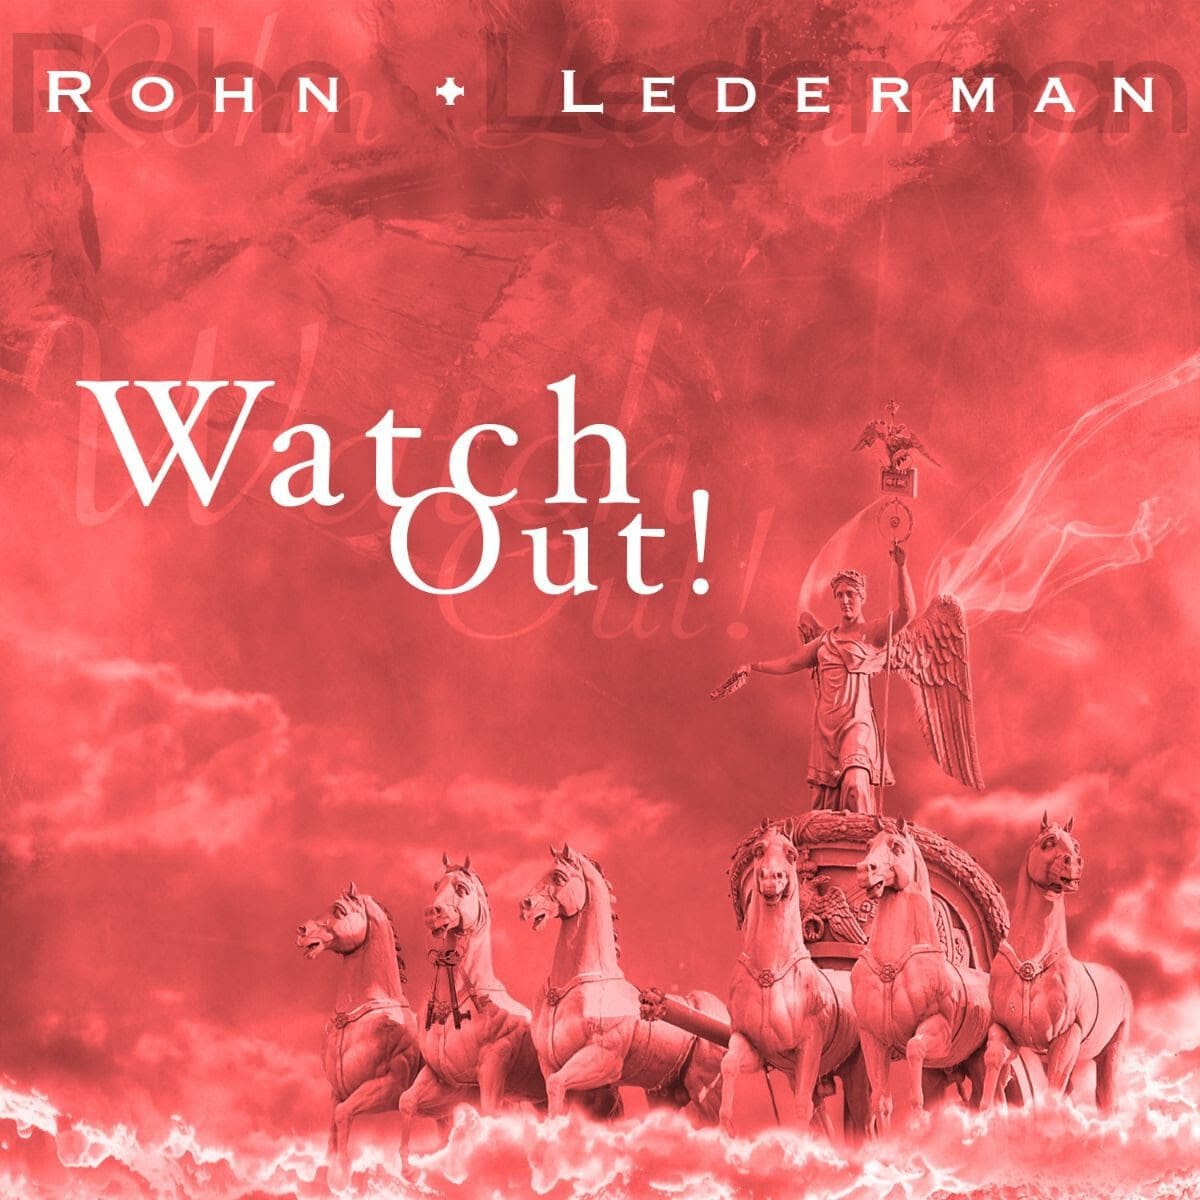 Rohn-Lederman project launches first single, 'Watch Out!'